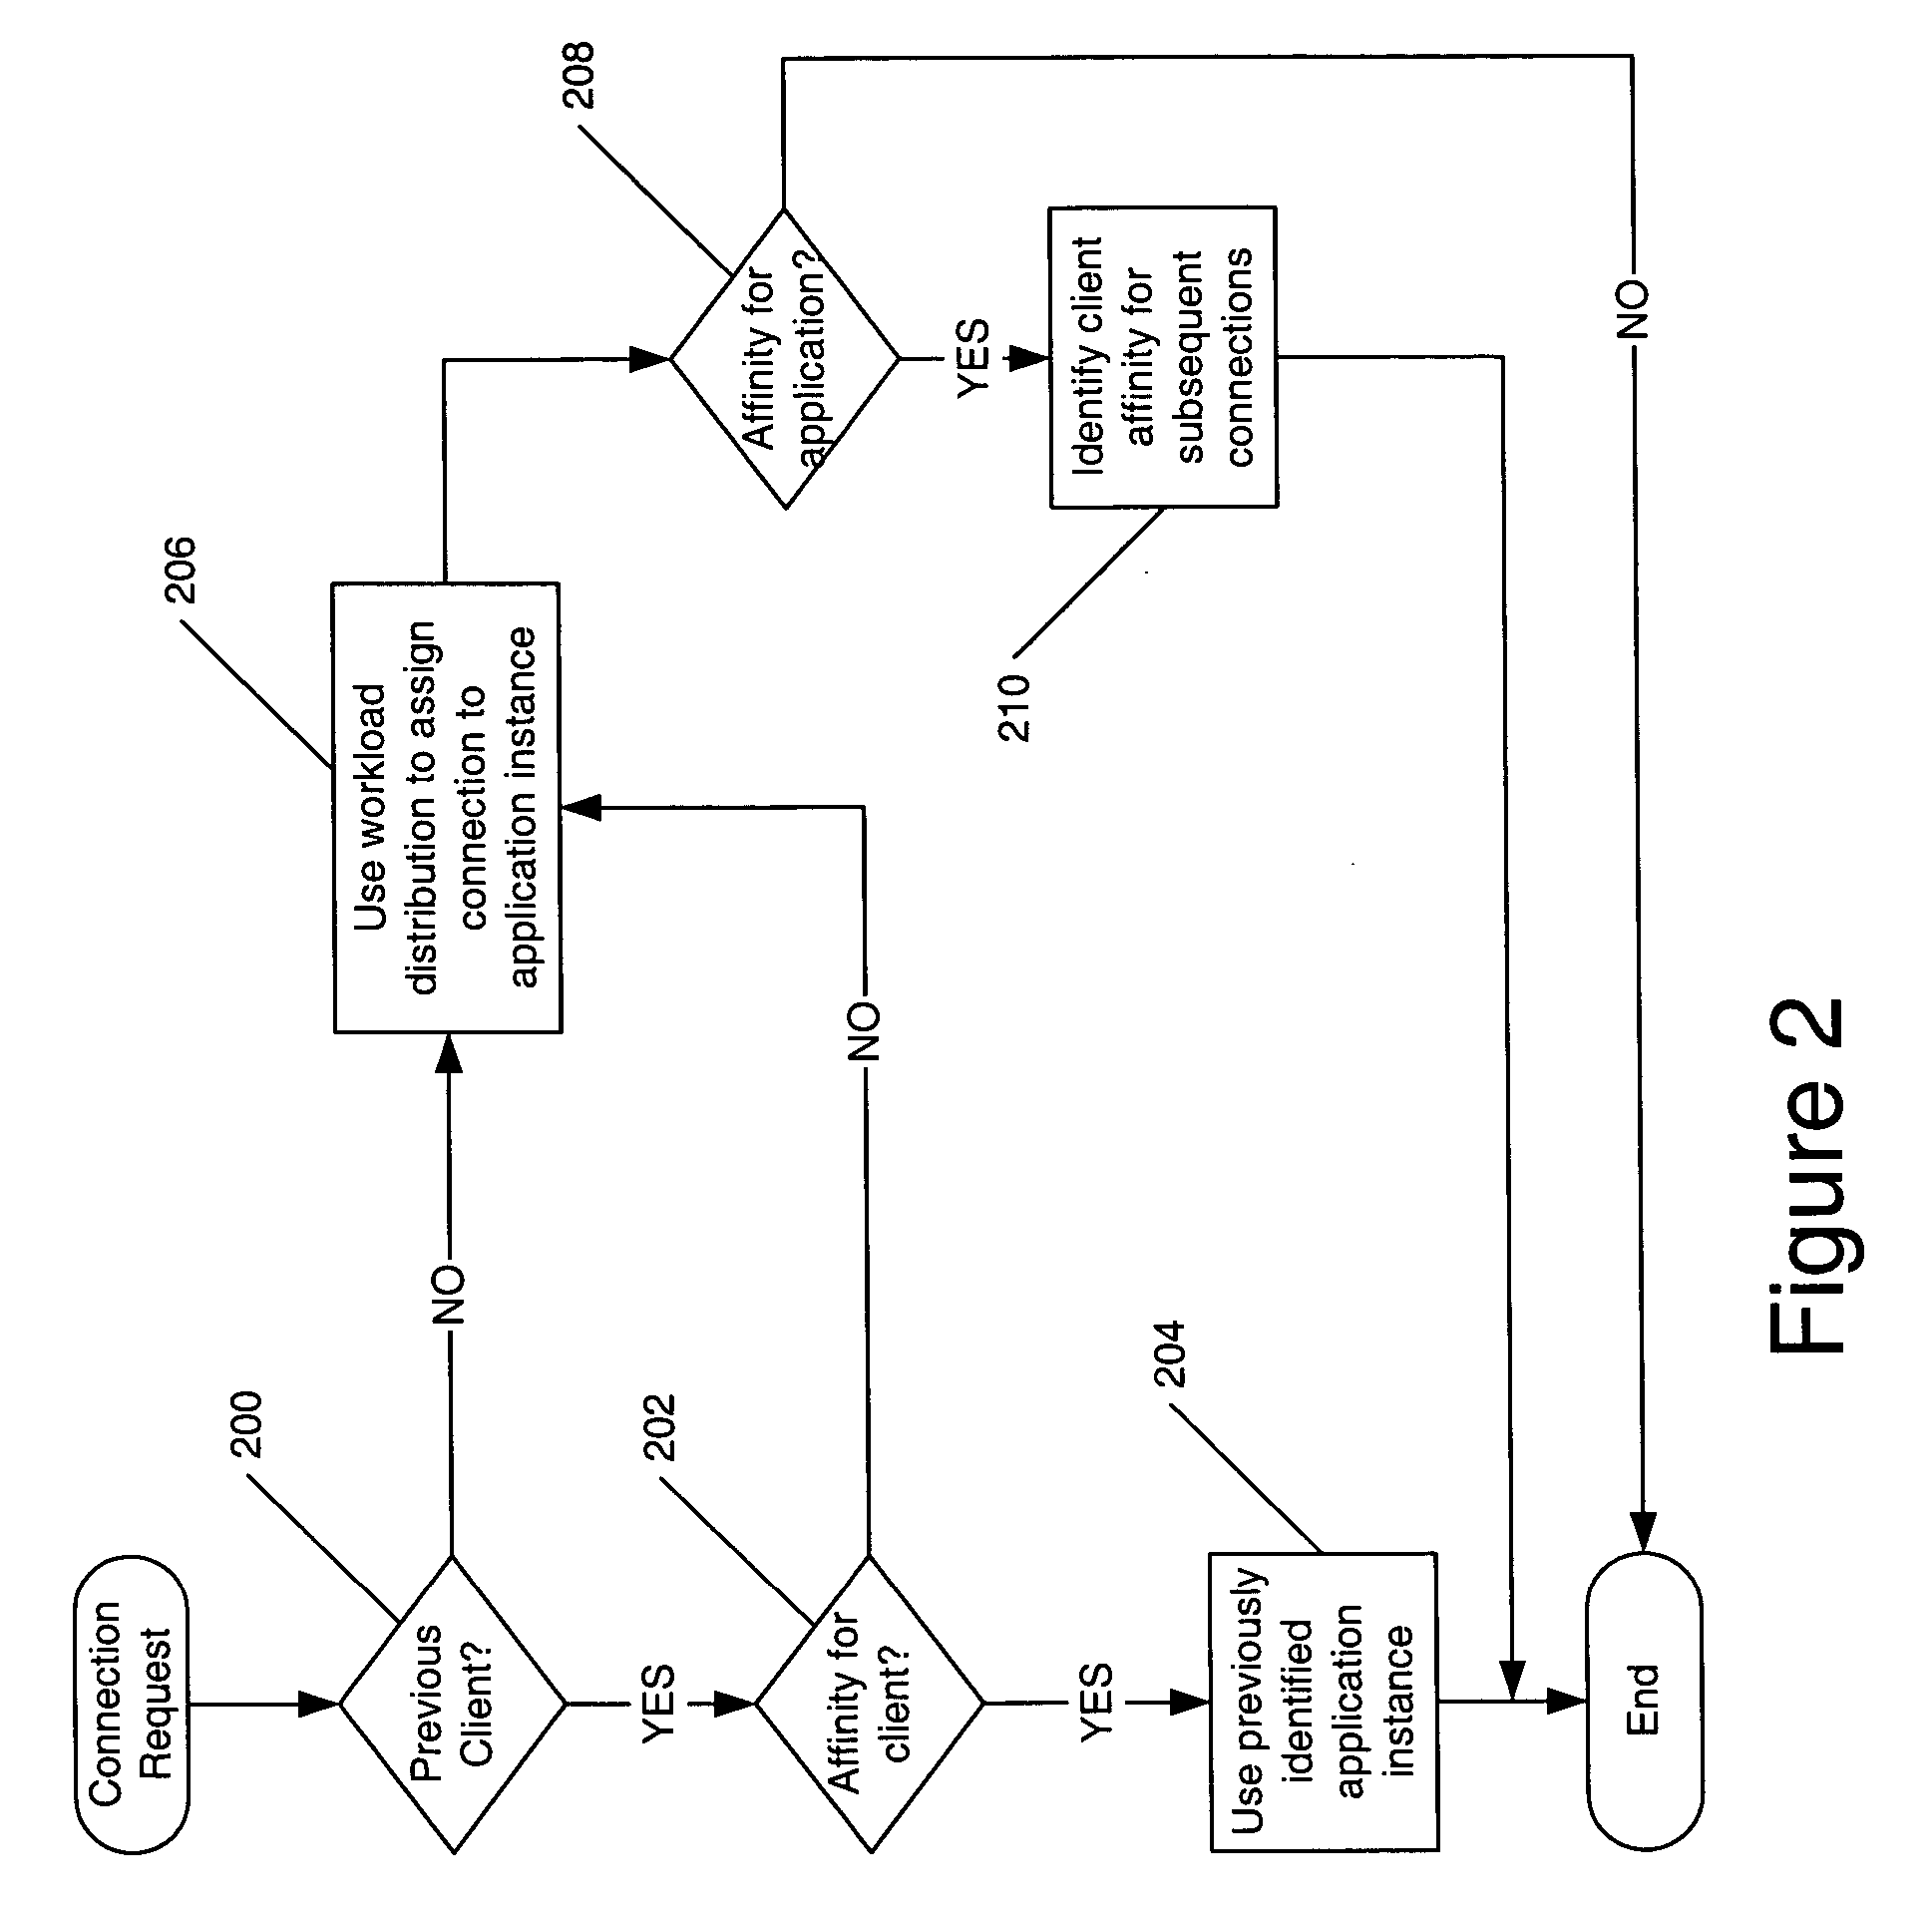 Methods, systems and computer program products for application instance level workload distribution affinities